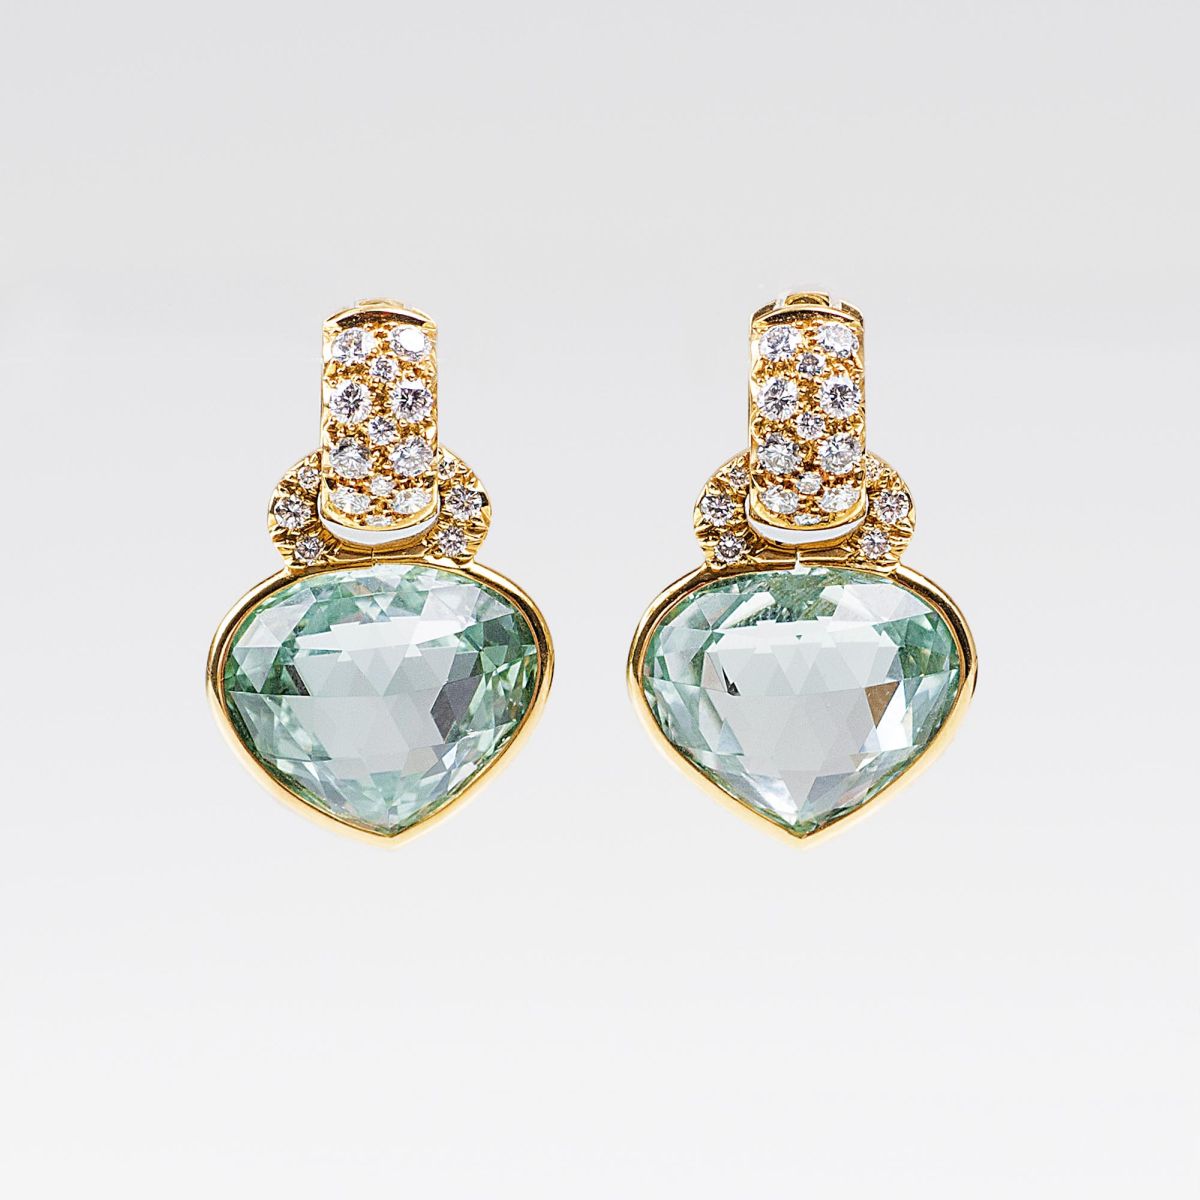 A Pair of Earrings with Aquamarines in Heart shape